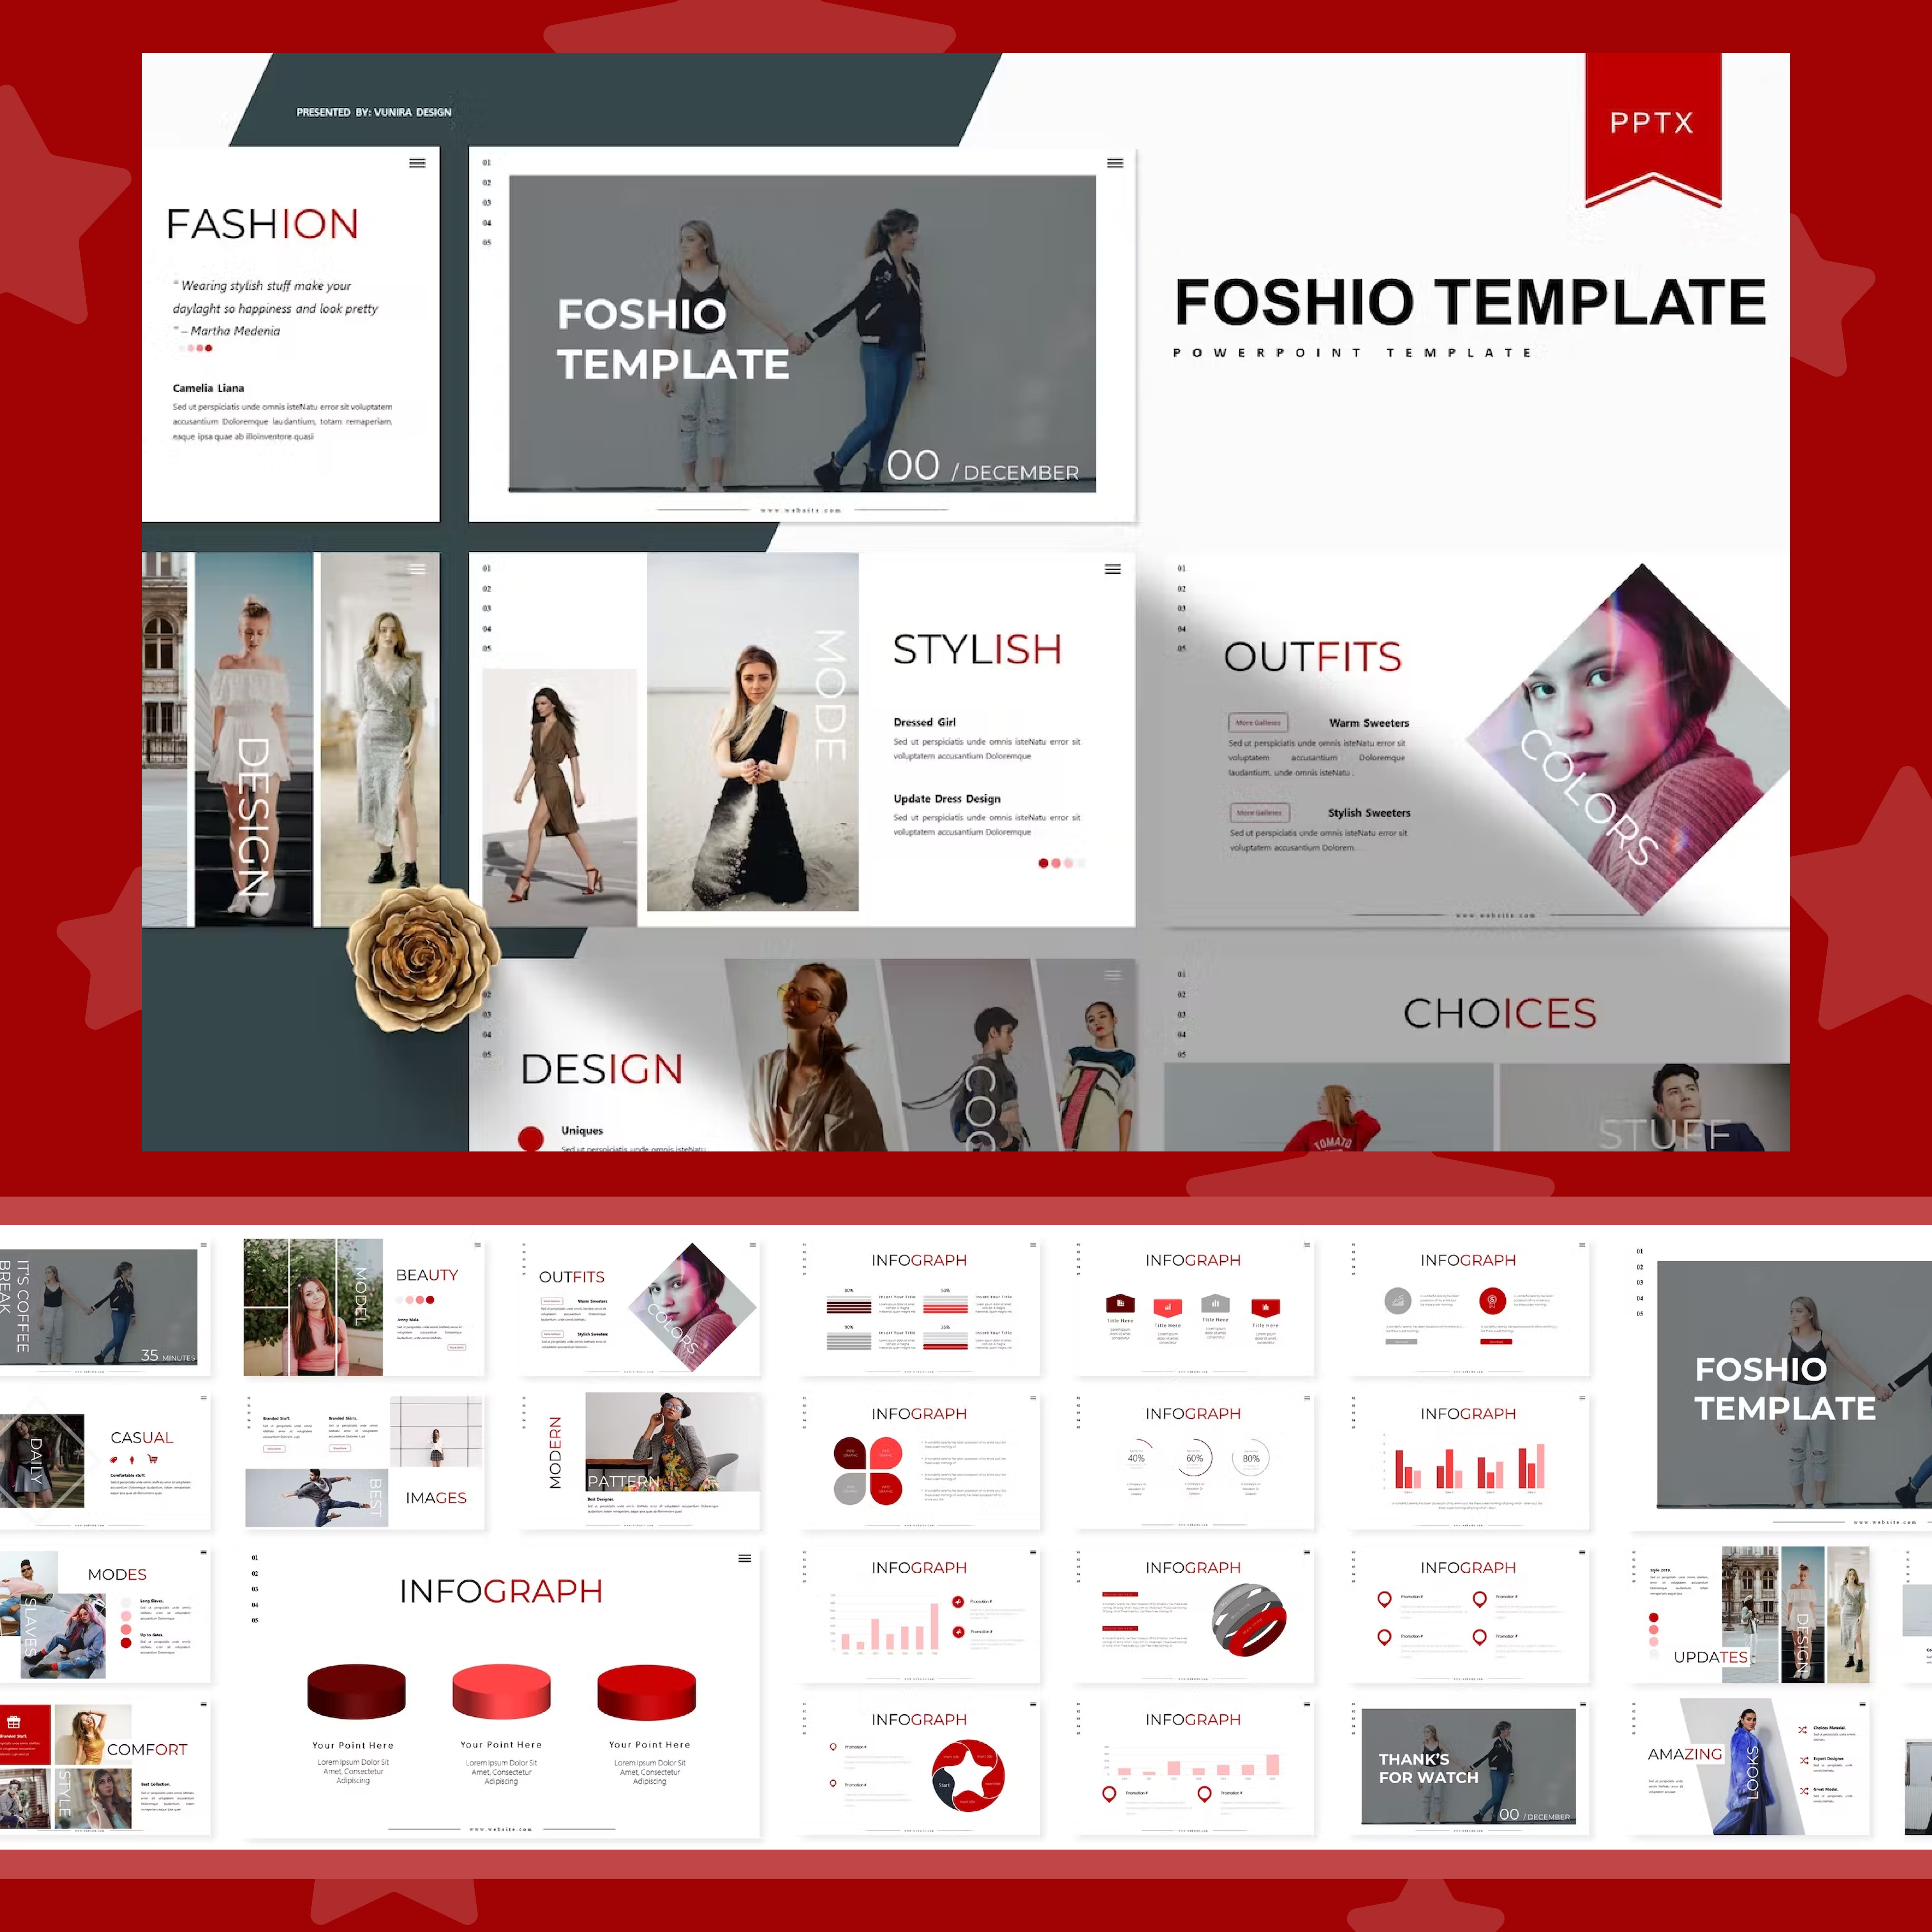 Preview foshio powerpoint template.